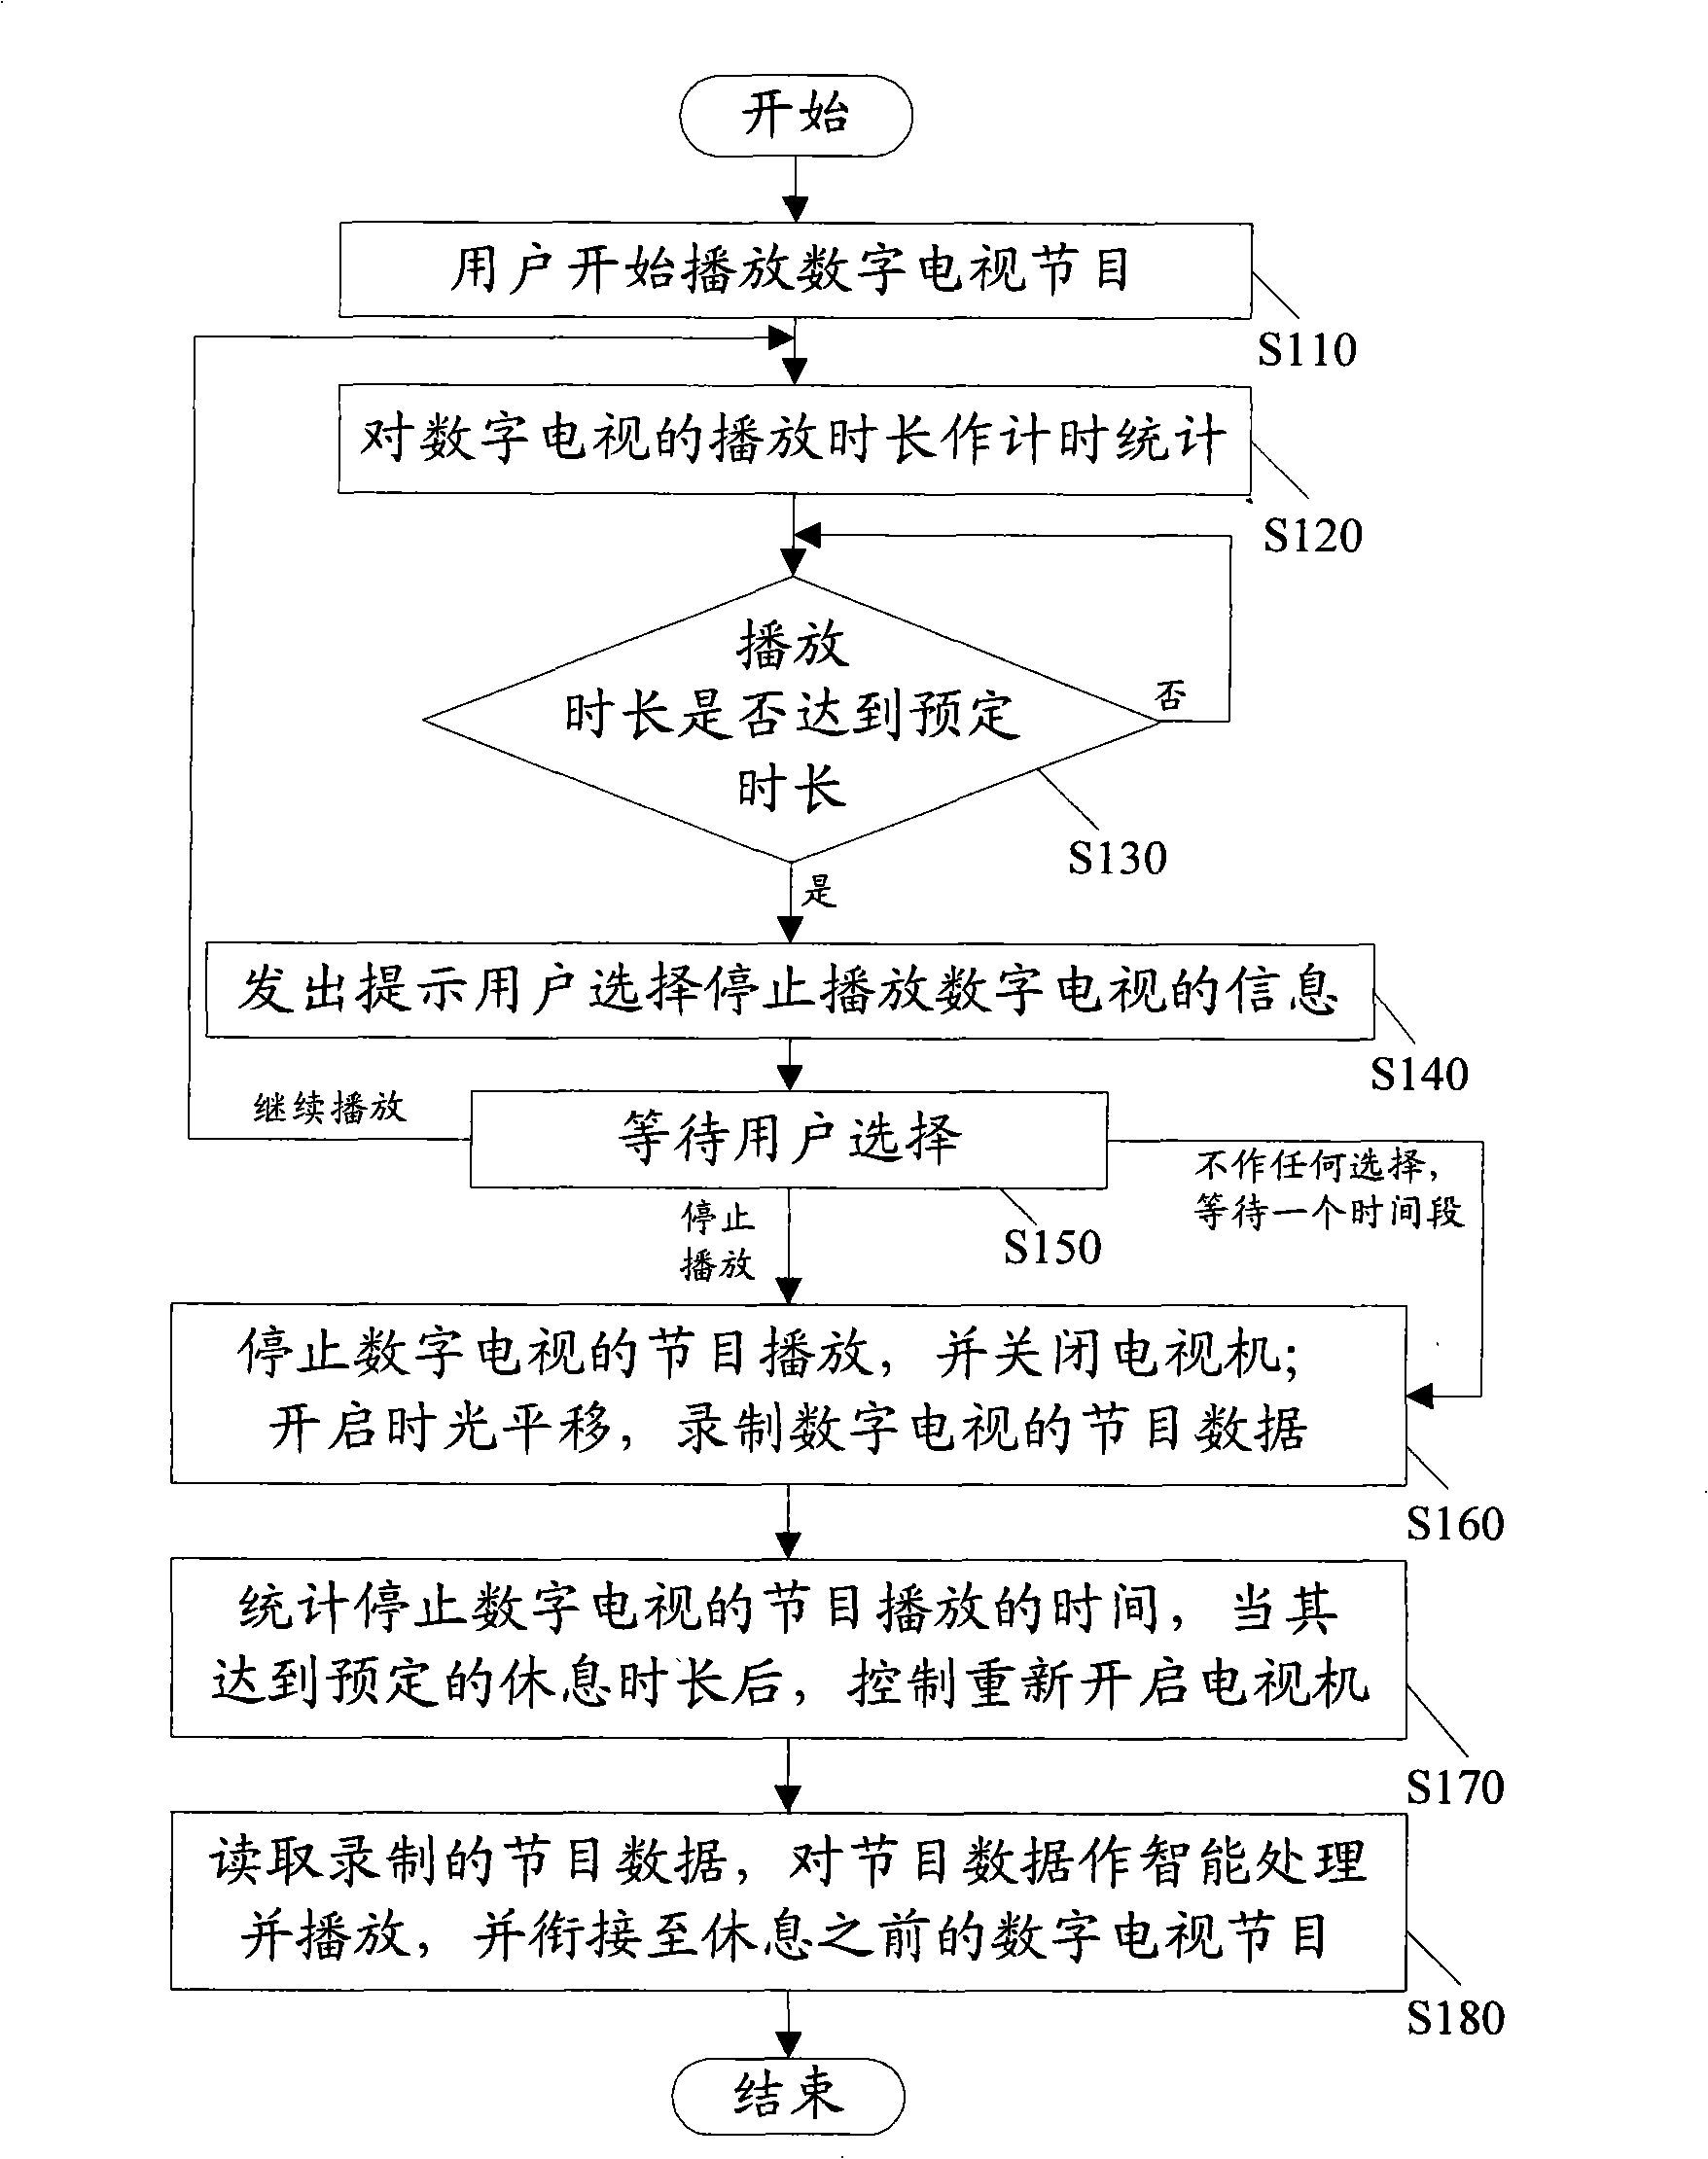 Digital TV receiving system, digital TV playing management method and system